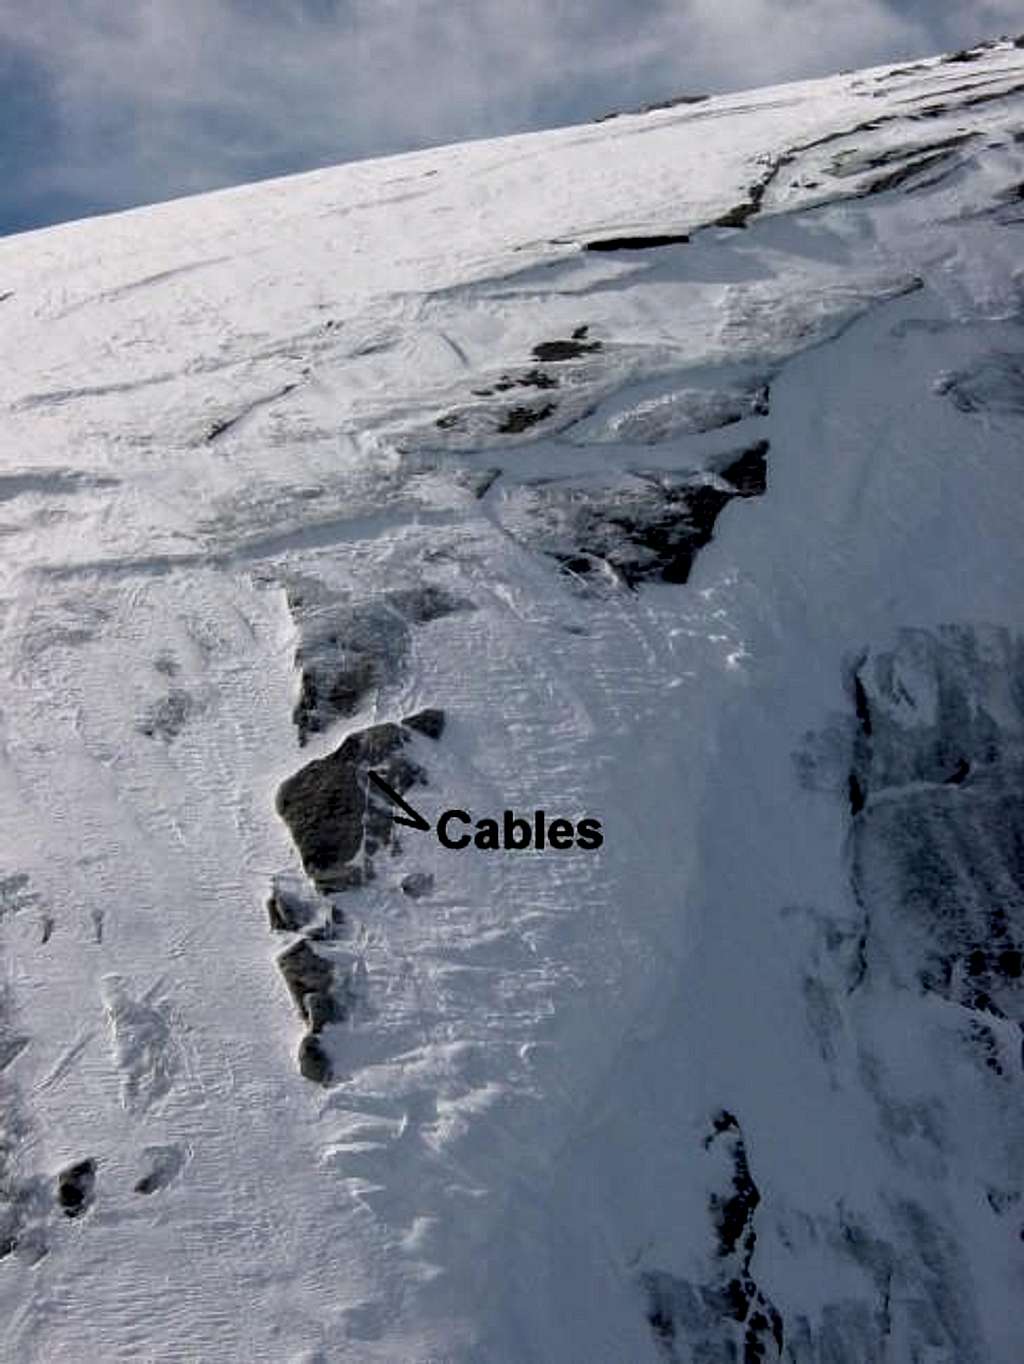 Half Dome's cables, first...